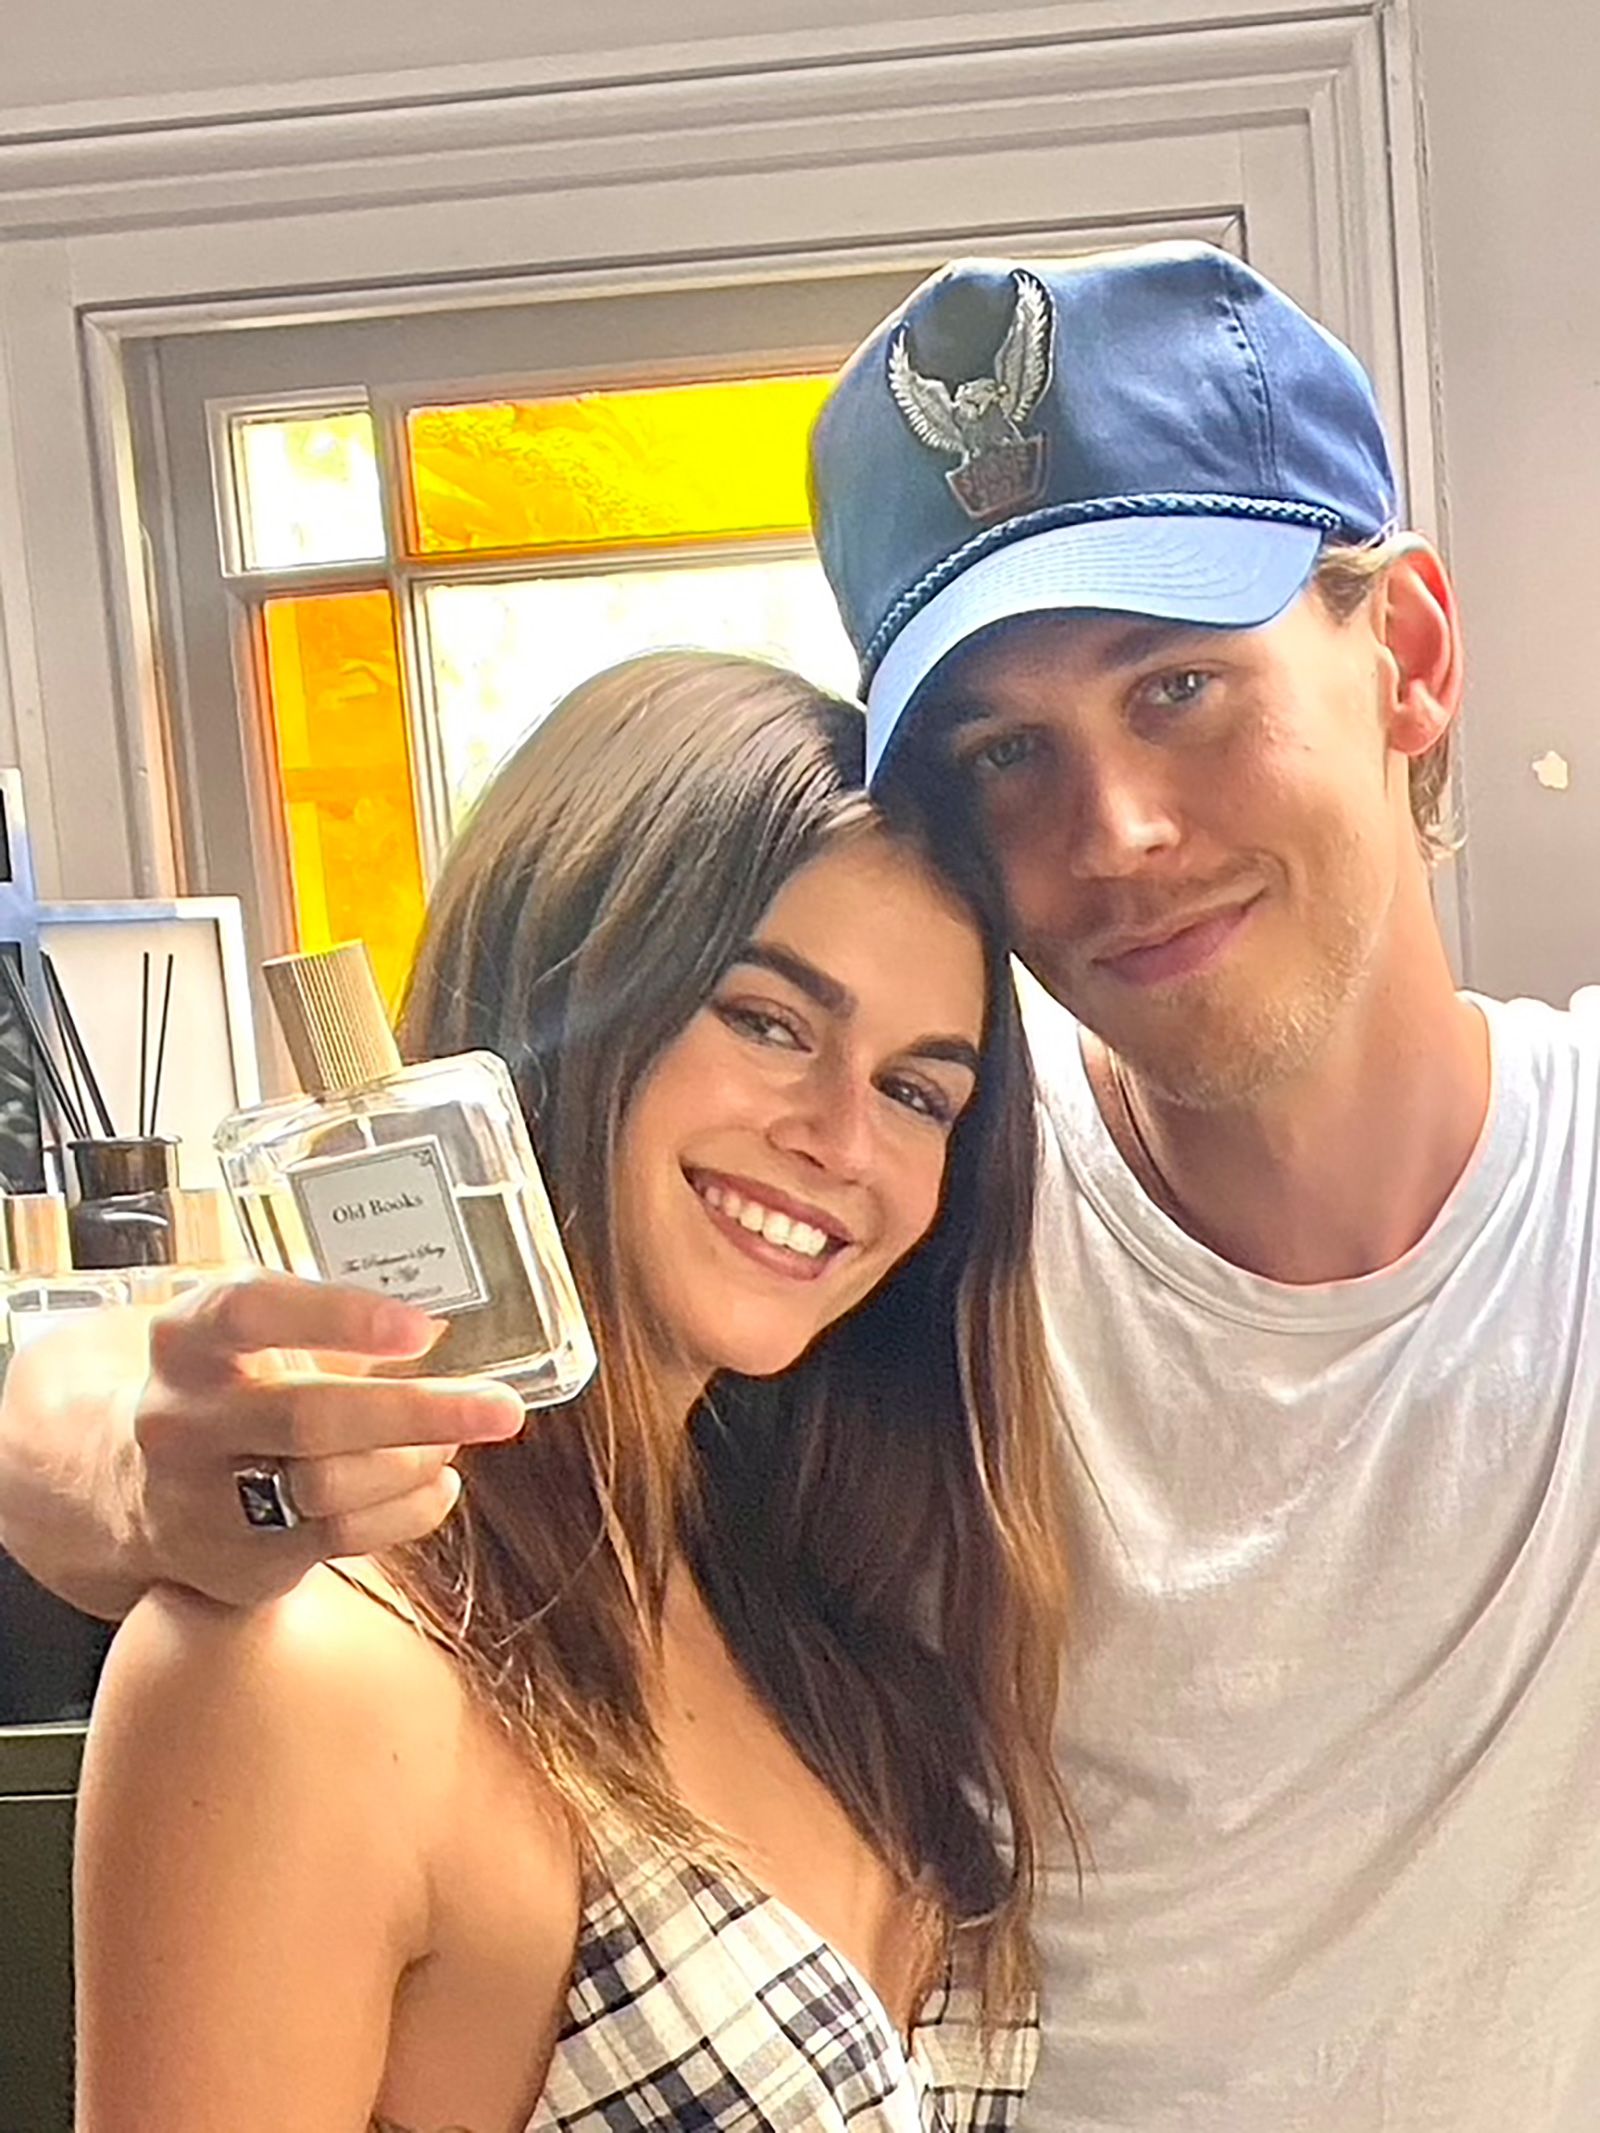 Actor Austin Butler has commissioned a scent specifically for a forthcoming role. He is seen here with his model girlfriend Kaia Gerber.